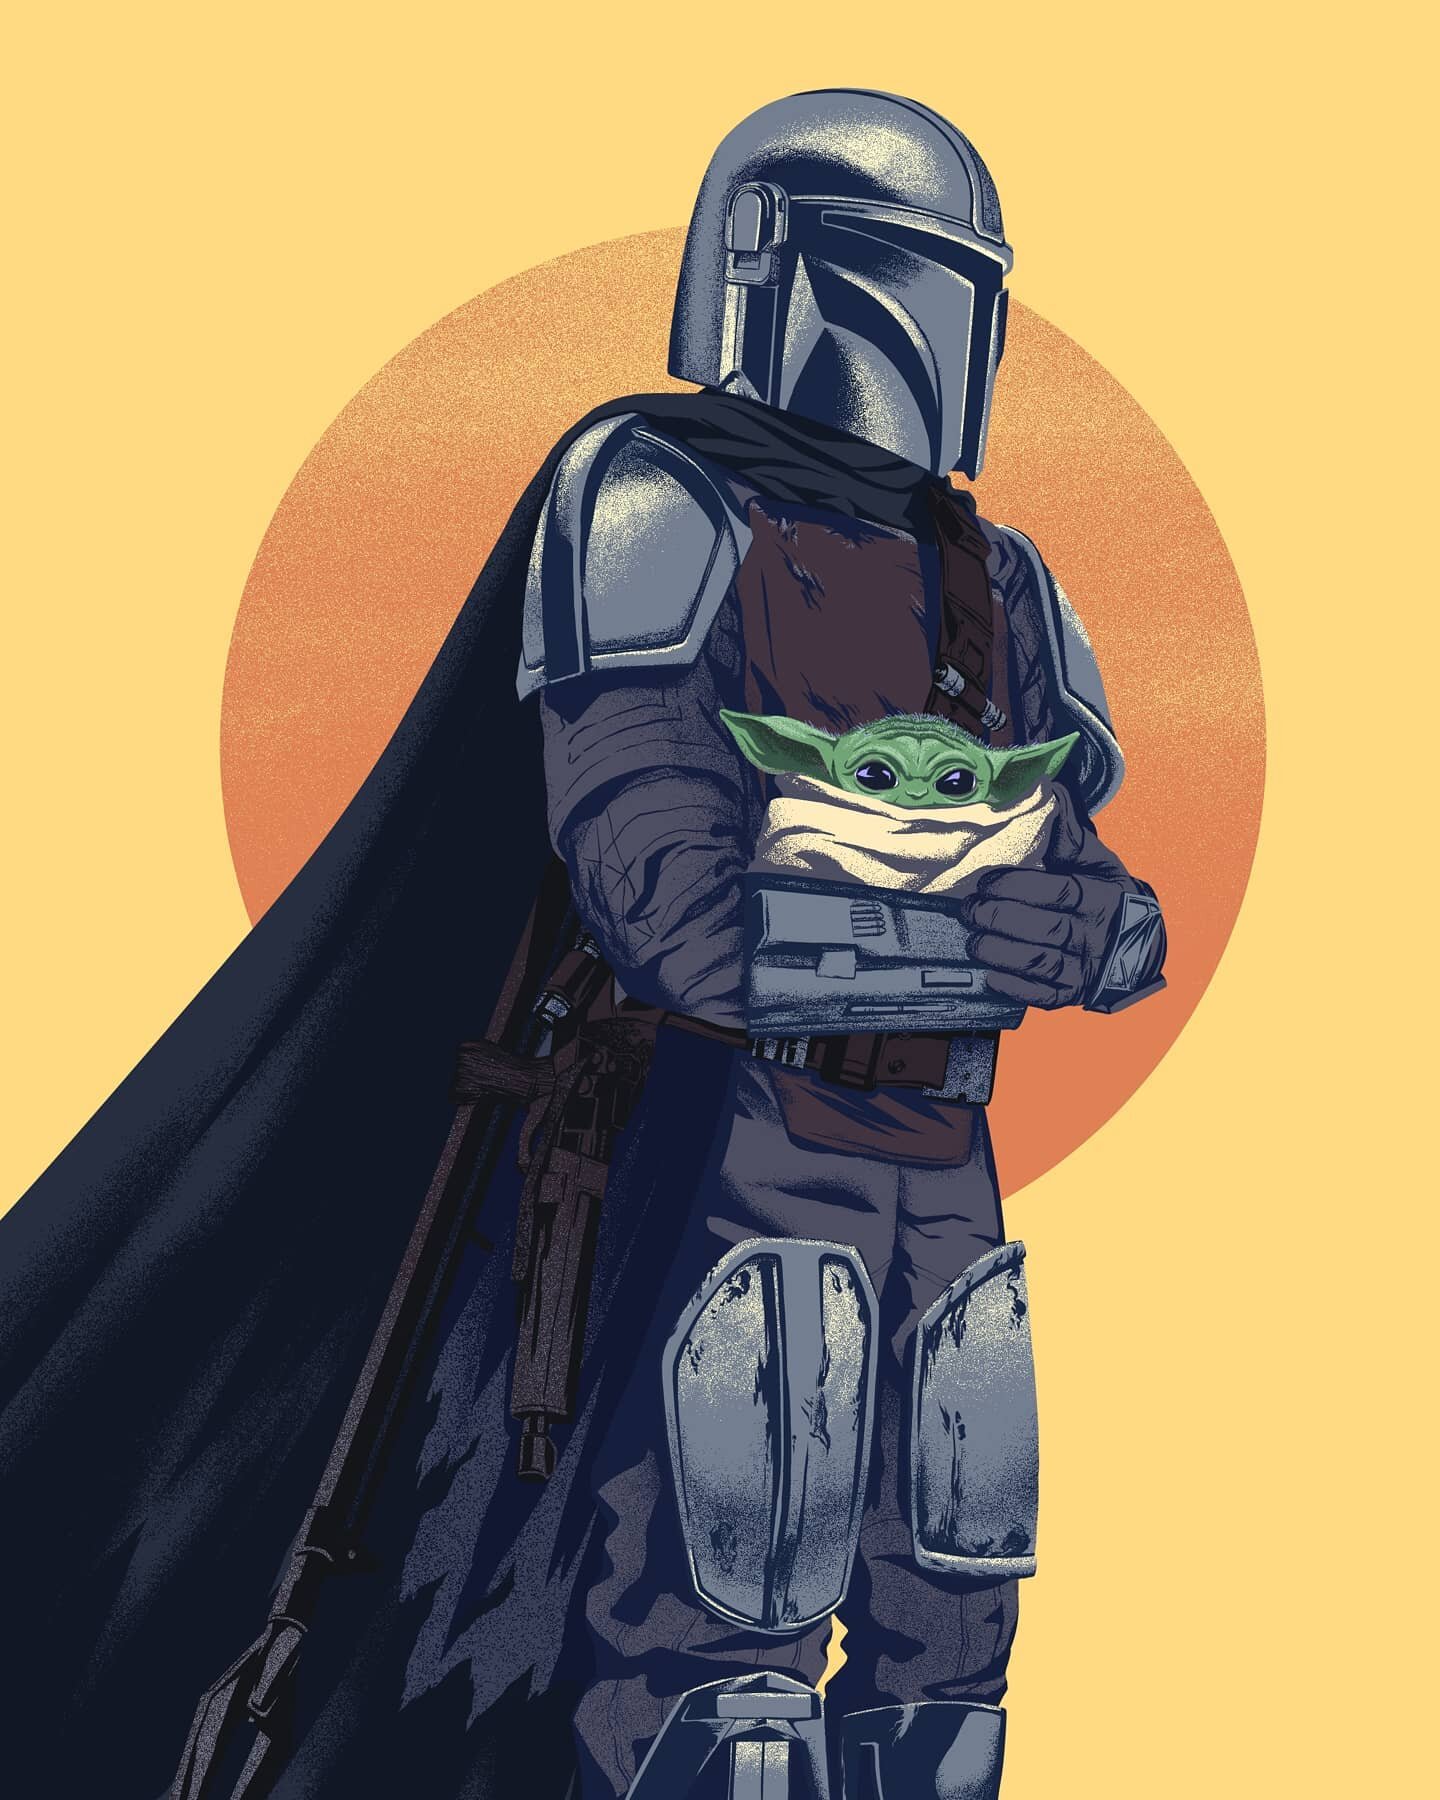 &quot;Take care of this little one... or maybe it will take care of you.&quot; Loved watching the Mandalorian when it was released and had lots of fun drawing Mando and baby Yoda for #maythe4th!

Which Star Wars film is your favorite?